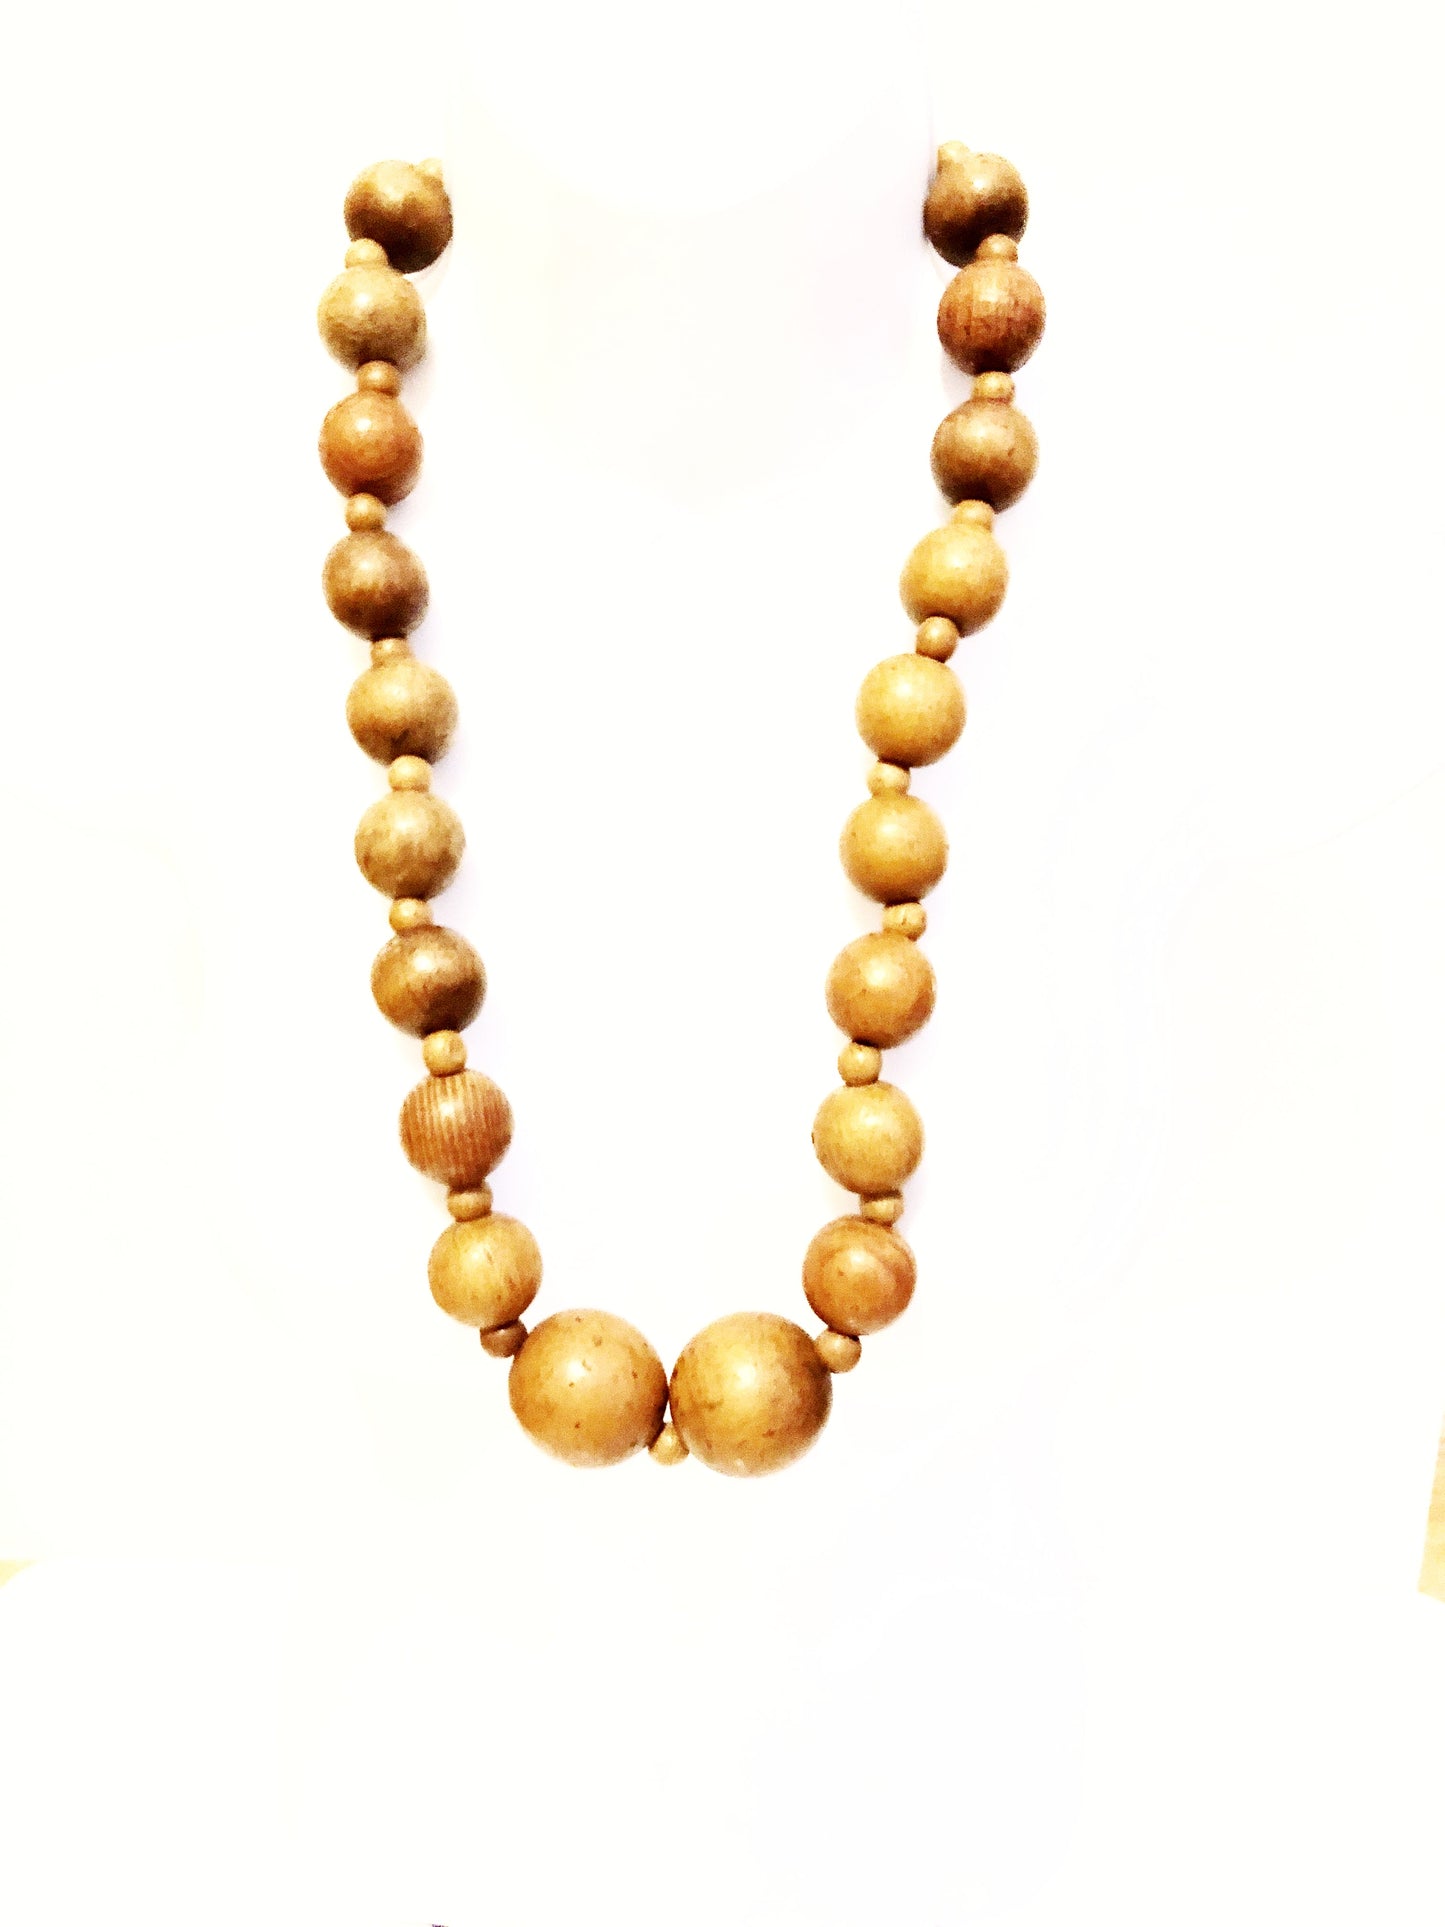 Thick wooden bead necklace